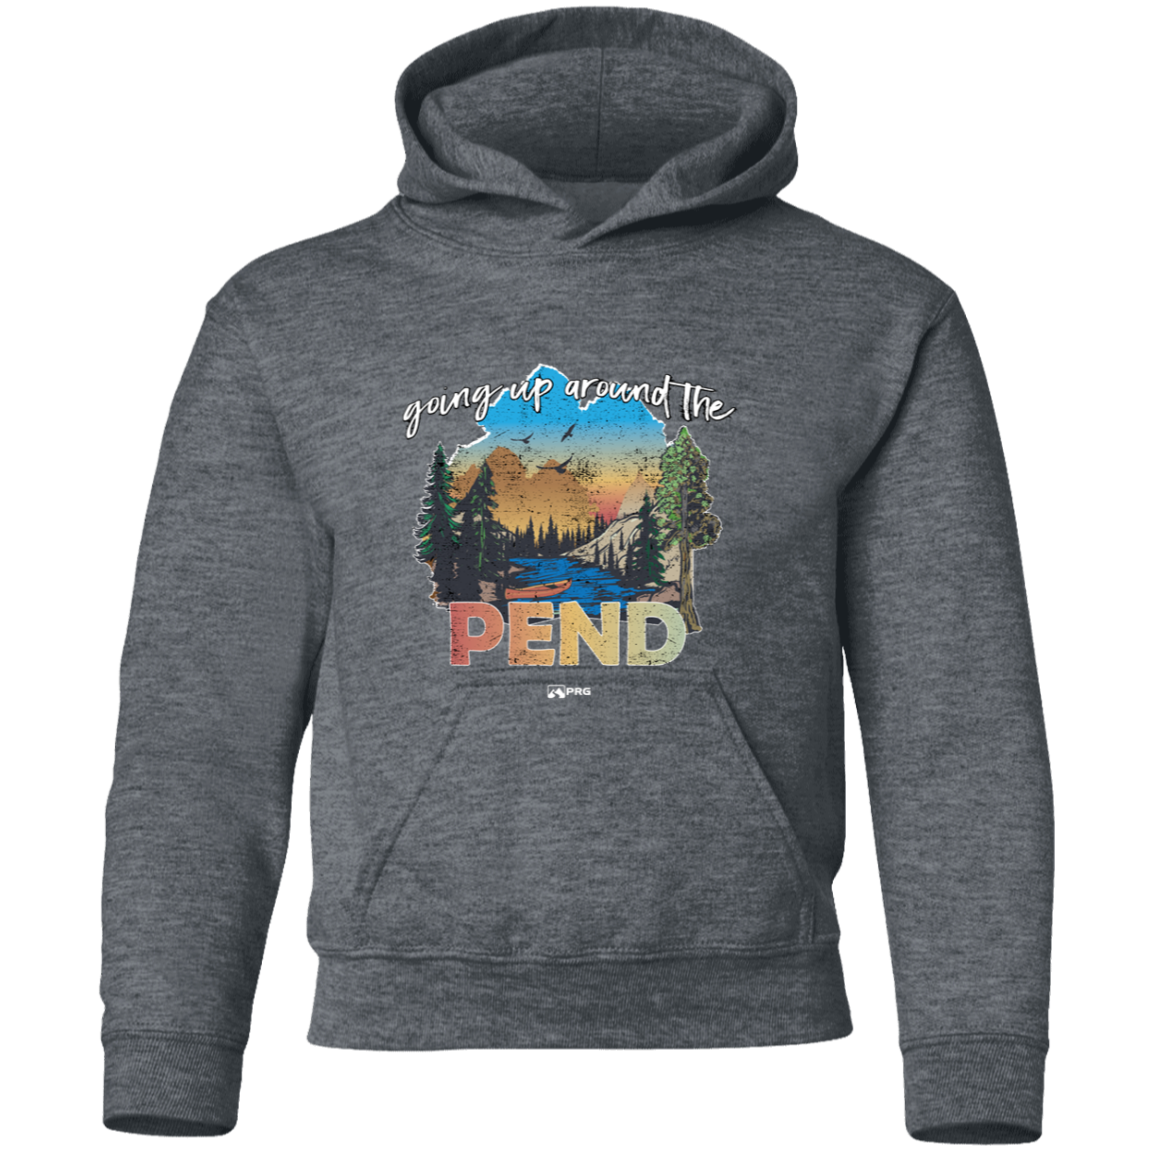 Around the Pend - Youth Hoodie